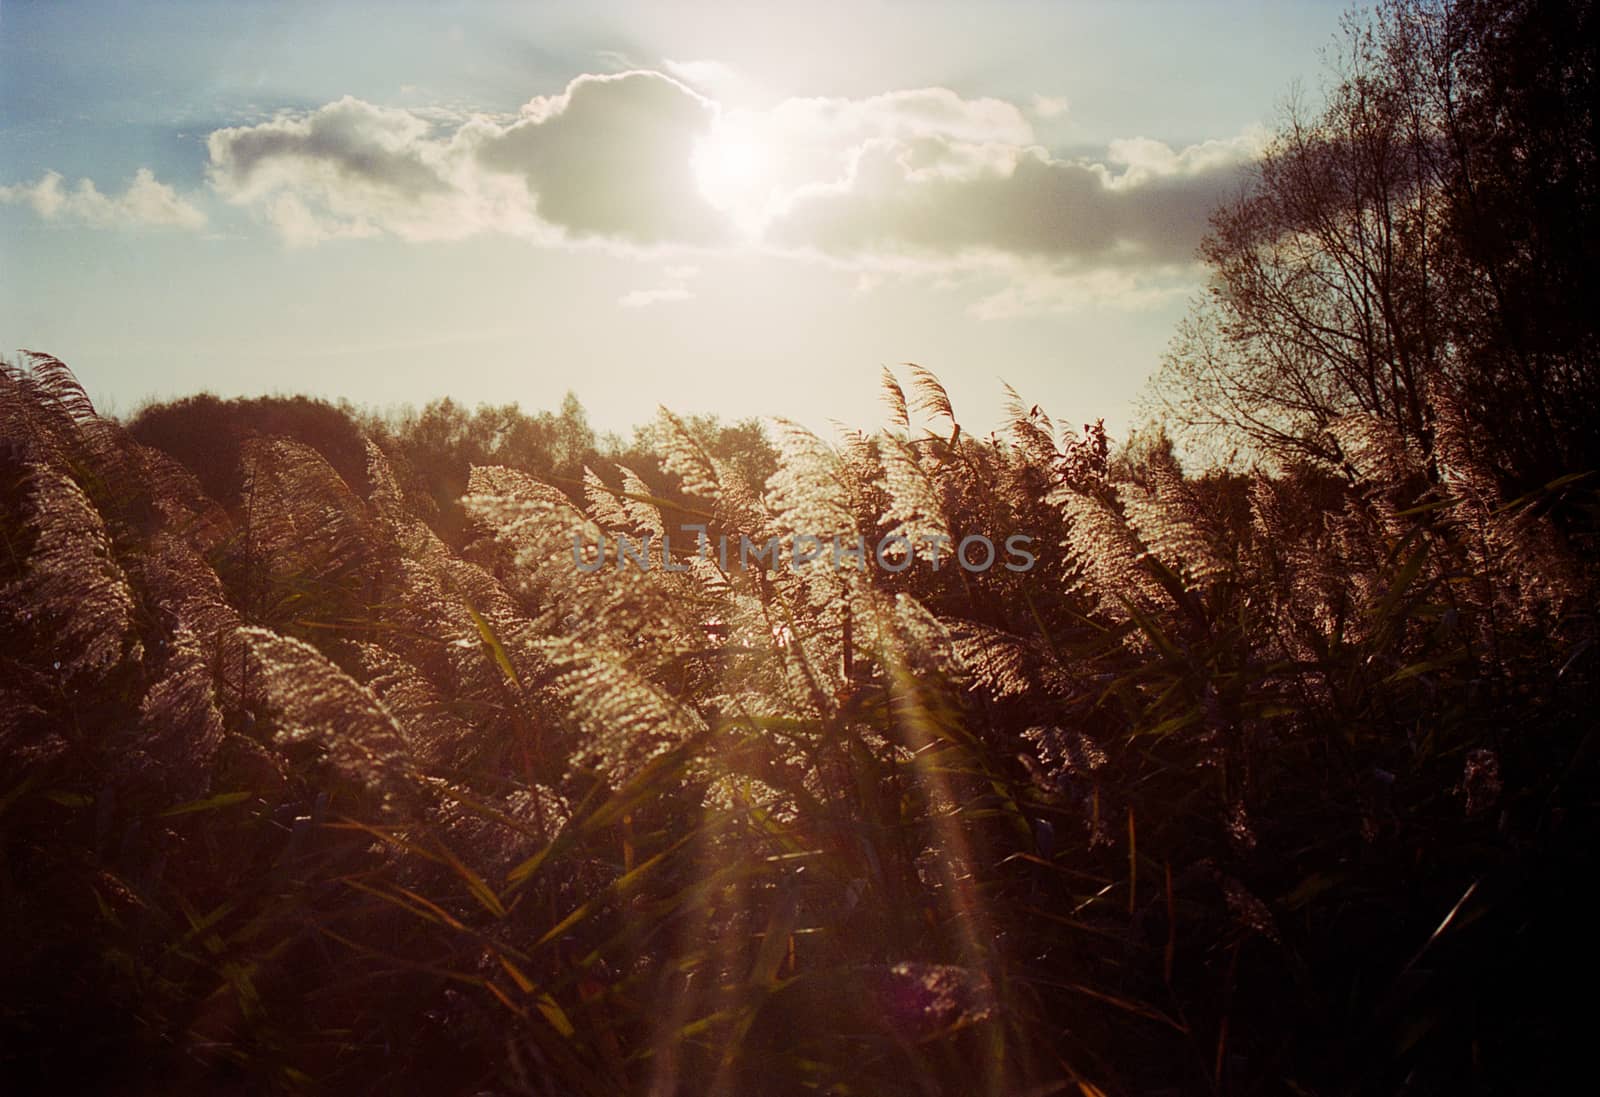 Silhouette of group of reed in warm autumnal  backlighting sunlight with clouds in the sky. The sun is bursting through the clouds